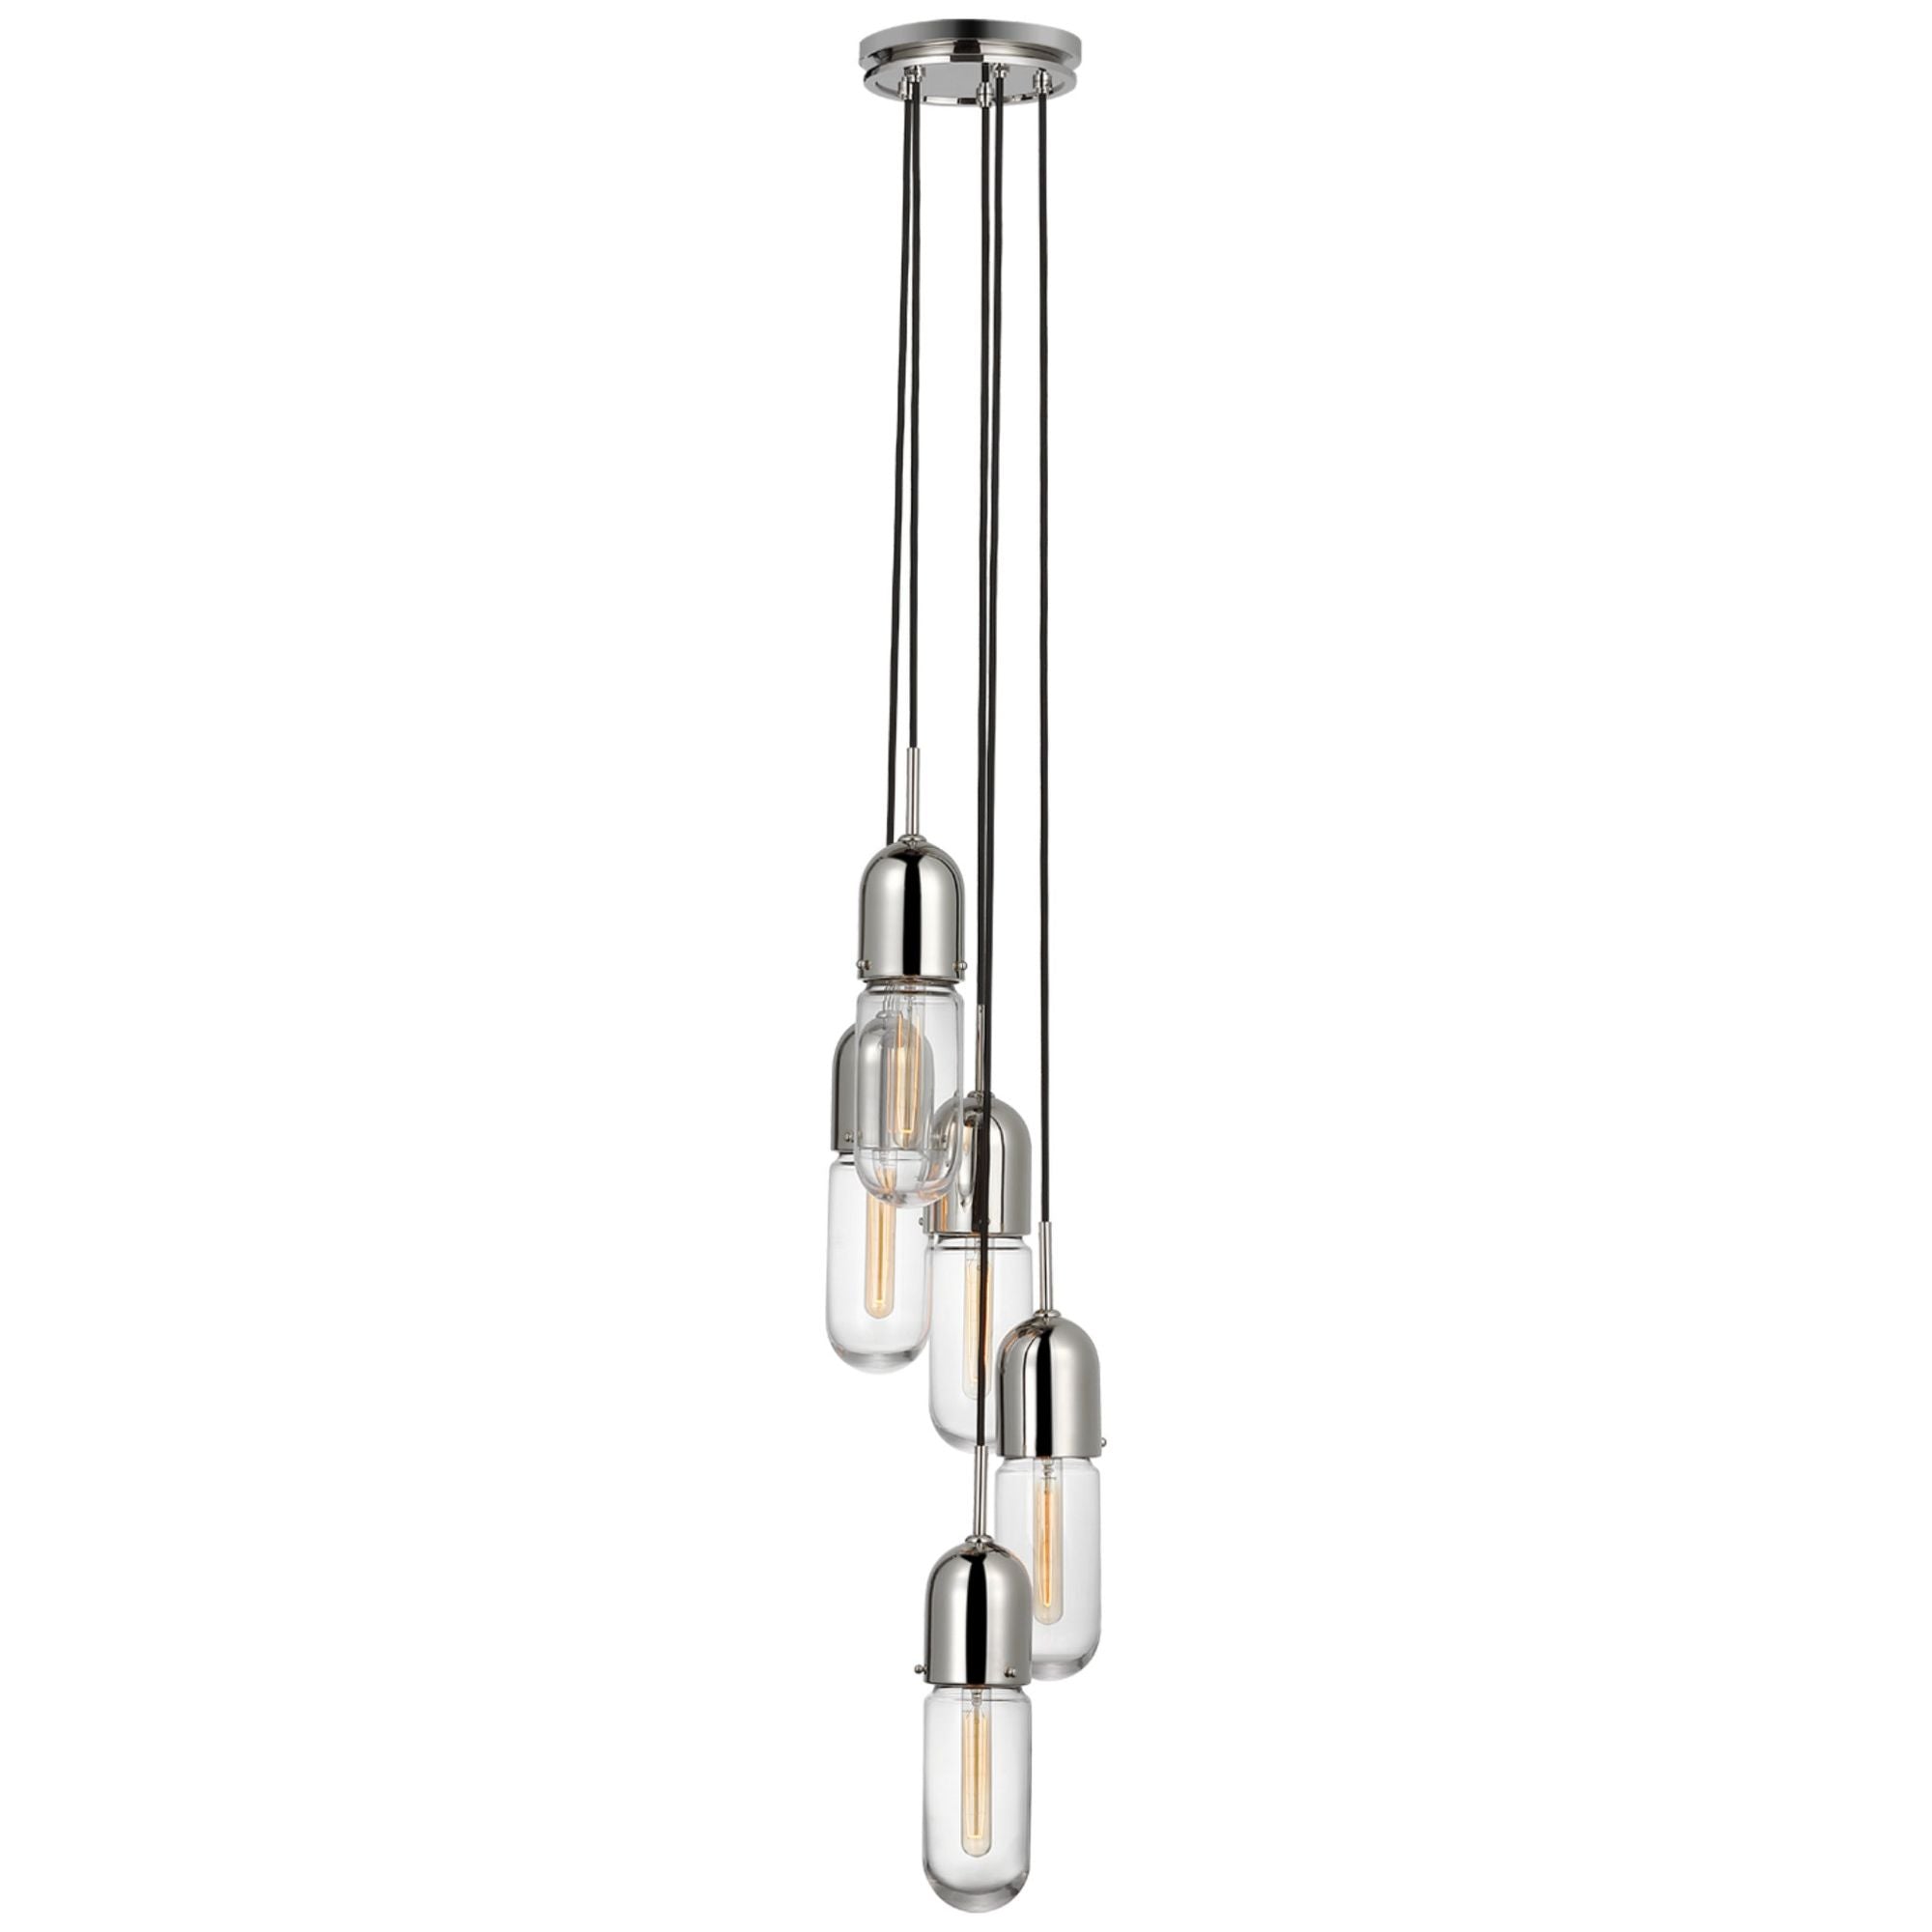 Thomas O'Brien Junio 5-Light Pendant in Polished Nickel with Clear Glass